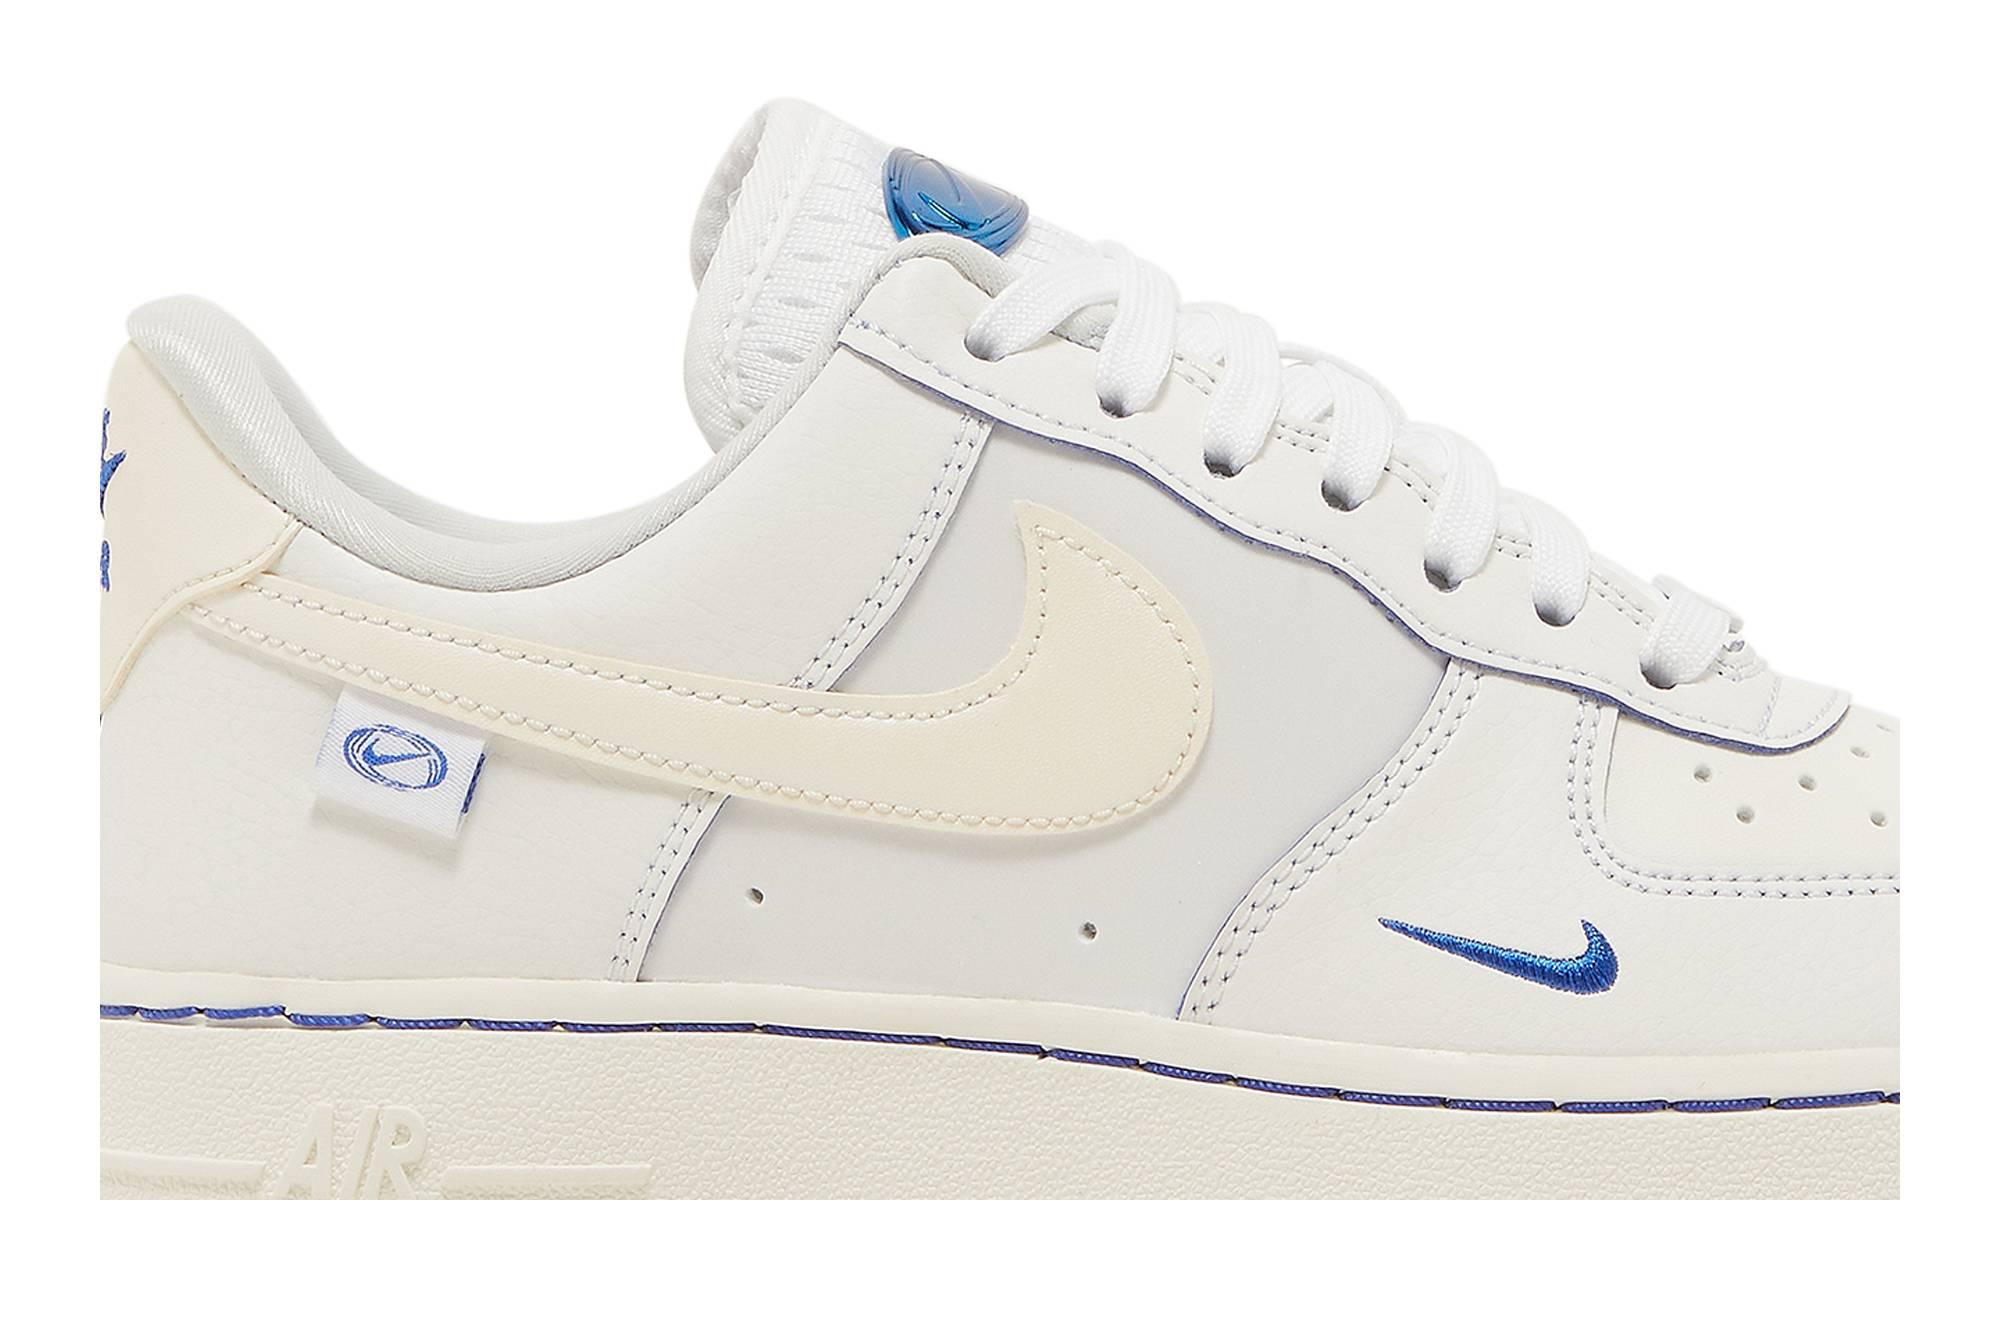 Nike Air Force 1 '07 Lx 'worldwide Pack - Sail Game Royal' in White | Lyst